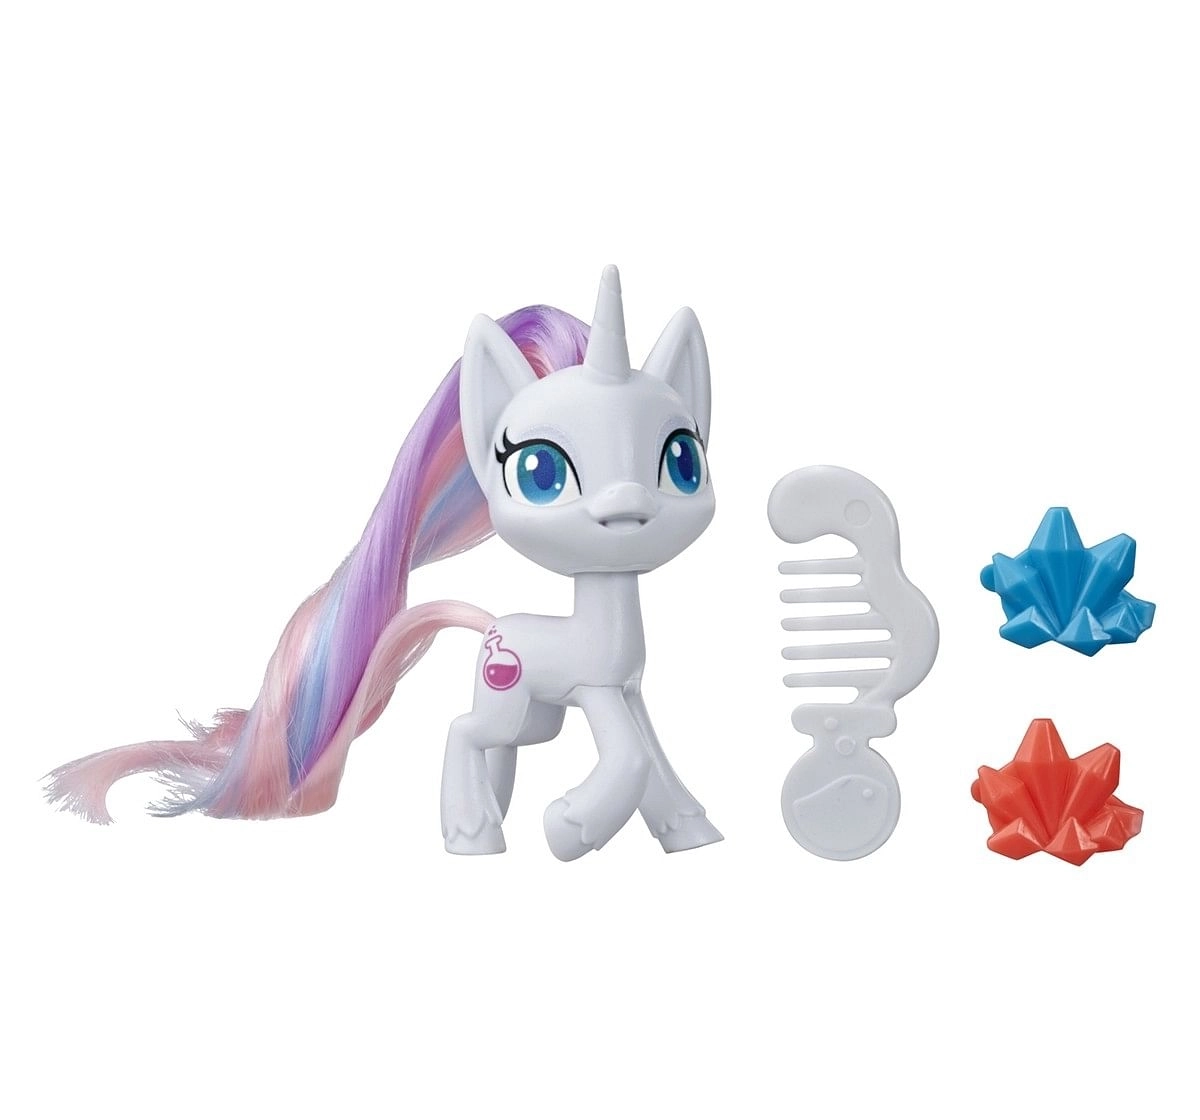 My Little Pony Applejack Potion Pony Figure-3-Inch Orange Pony Toy with Brushable Hair, Comb, and 4 Surprise Accessories for age 3Y+